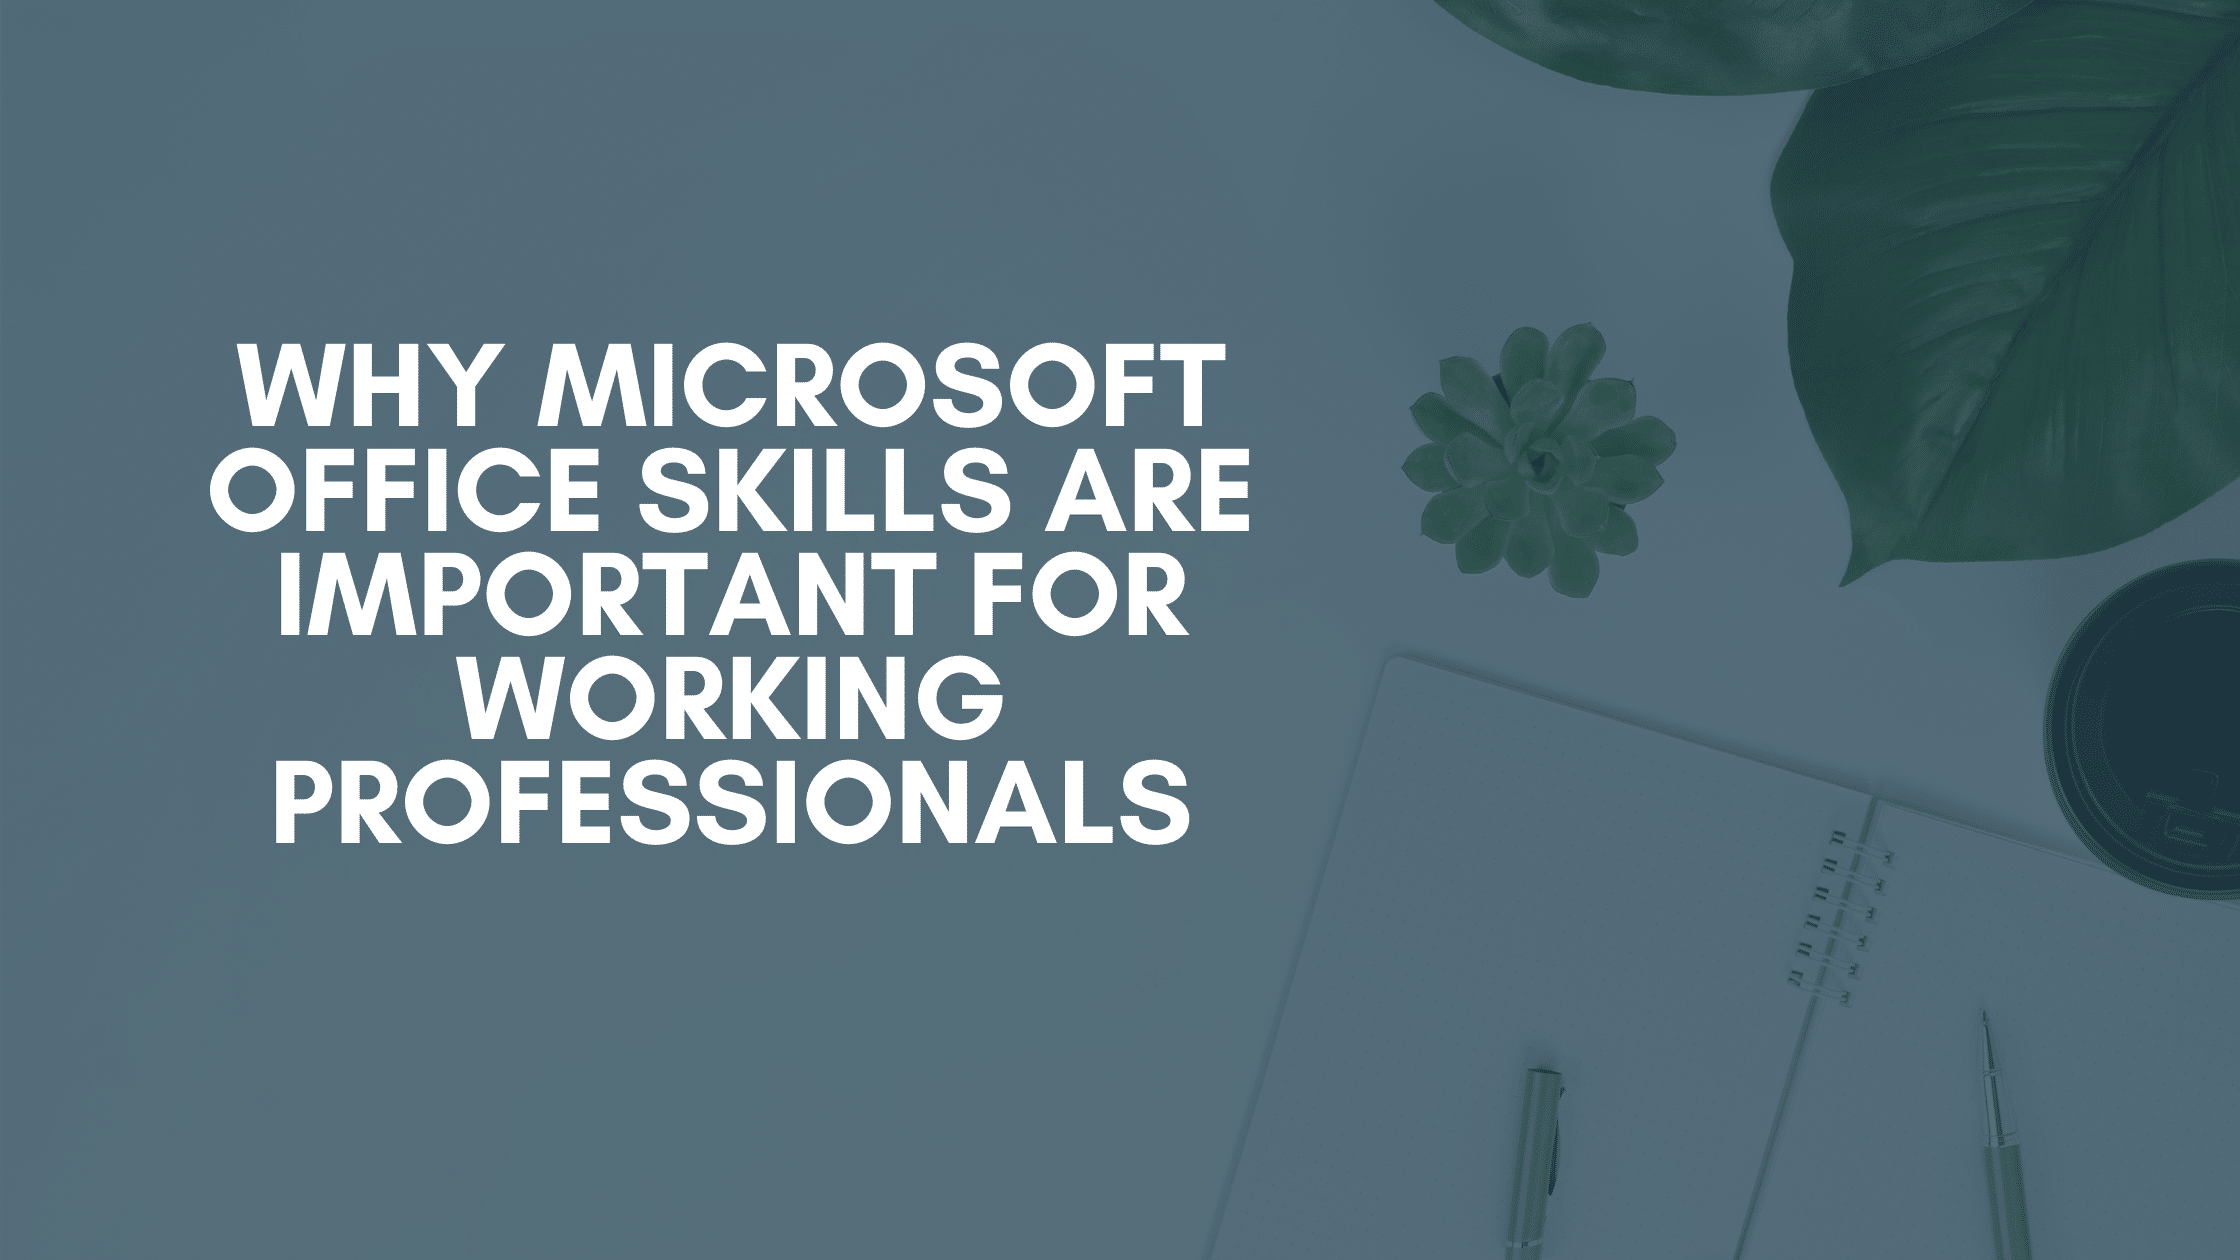 Why Microsoft Office Skills are Important for Working Professionals